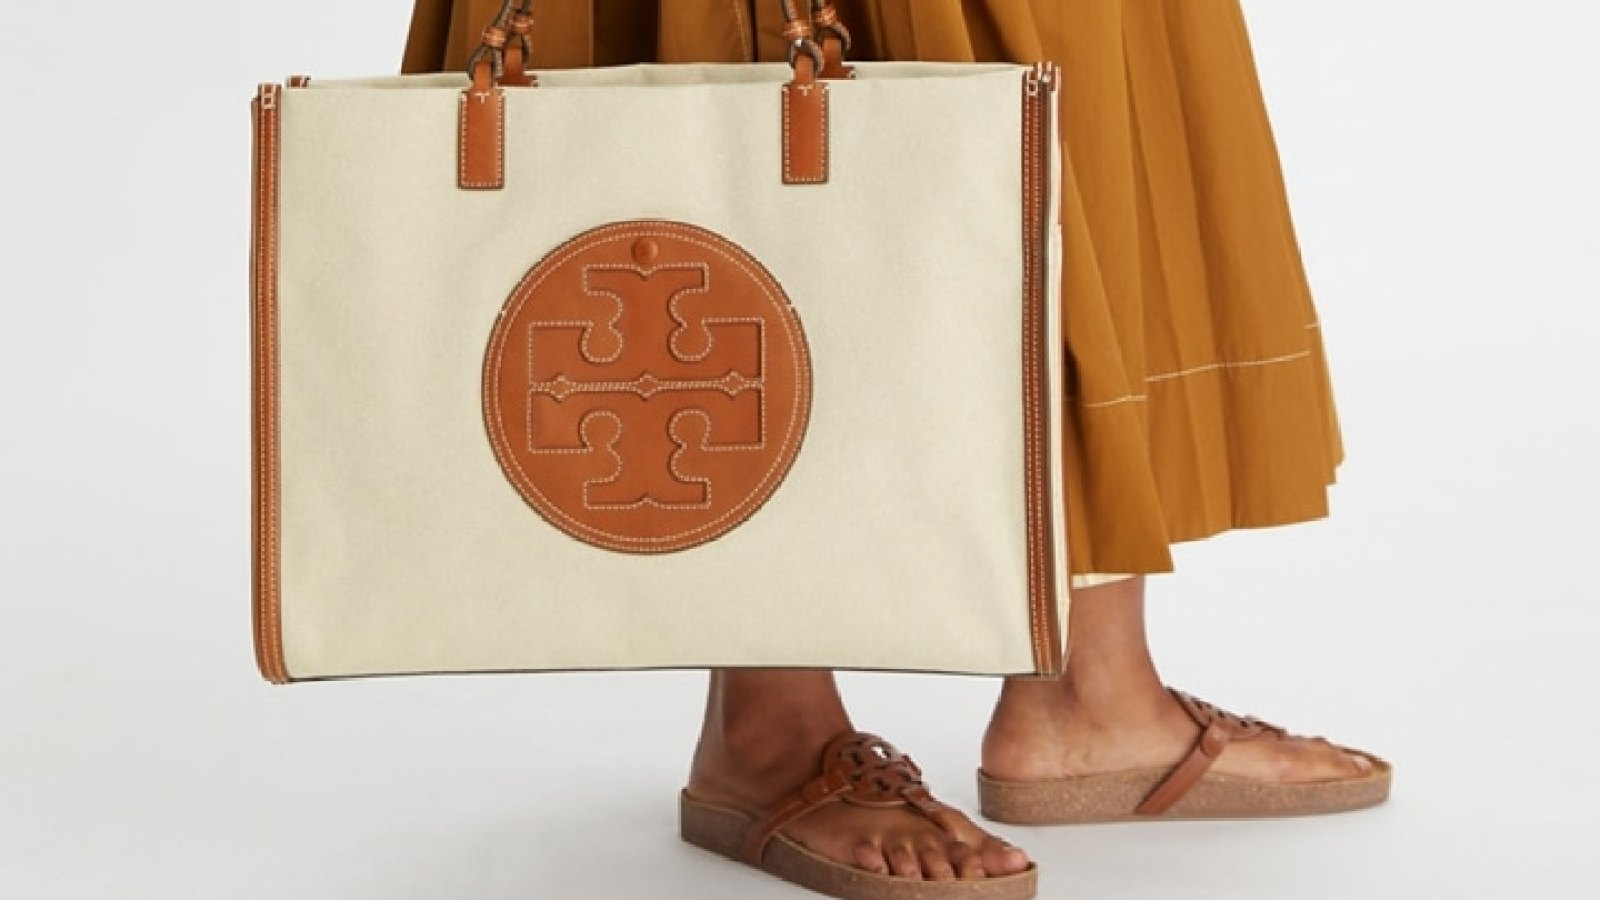 Our best-selling Ever-Ready Tote - Tory Burch